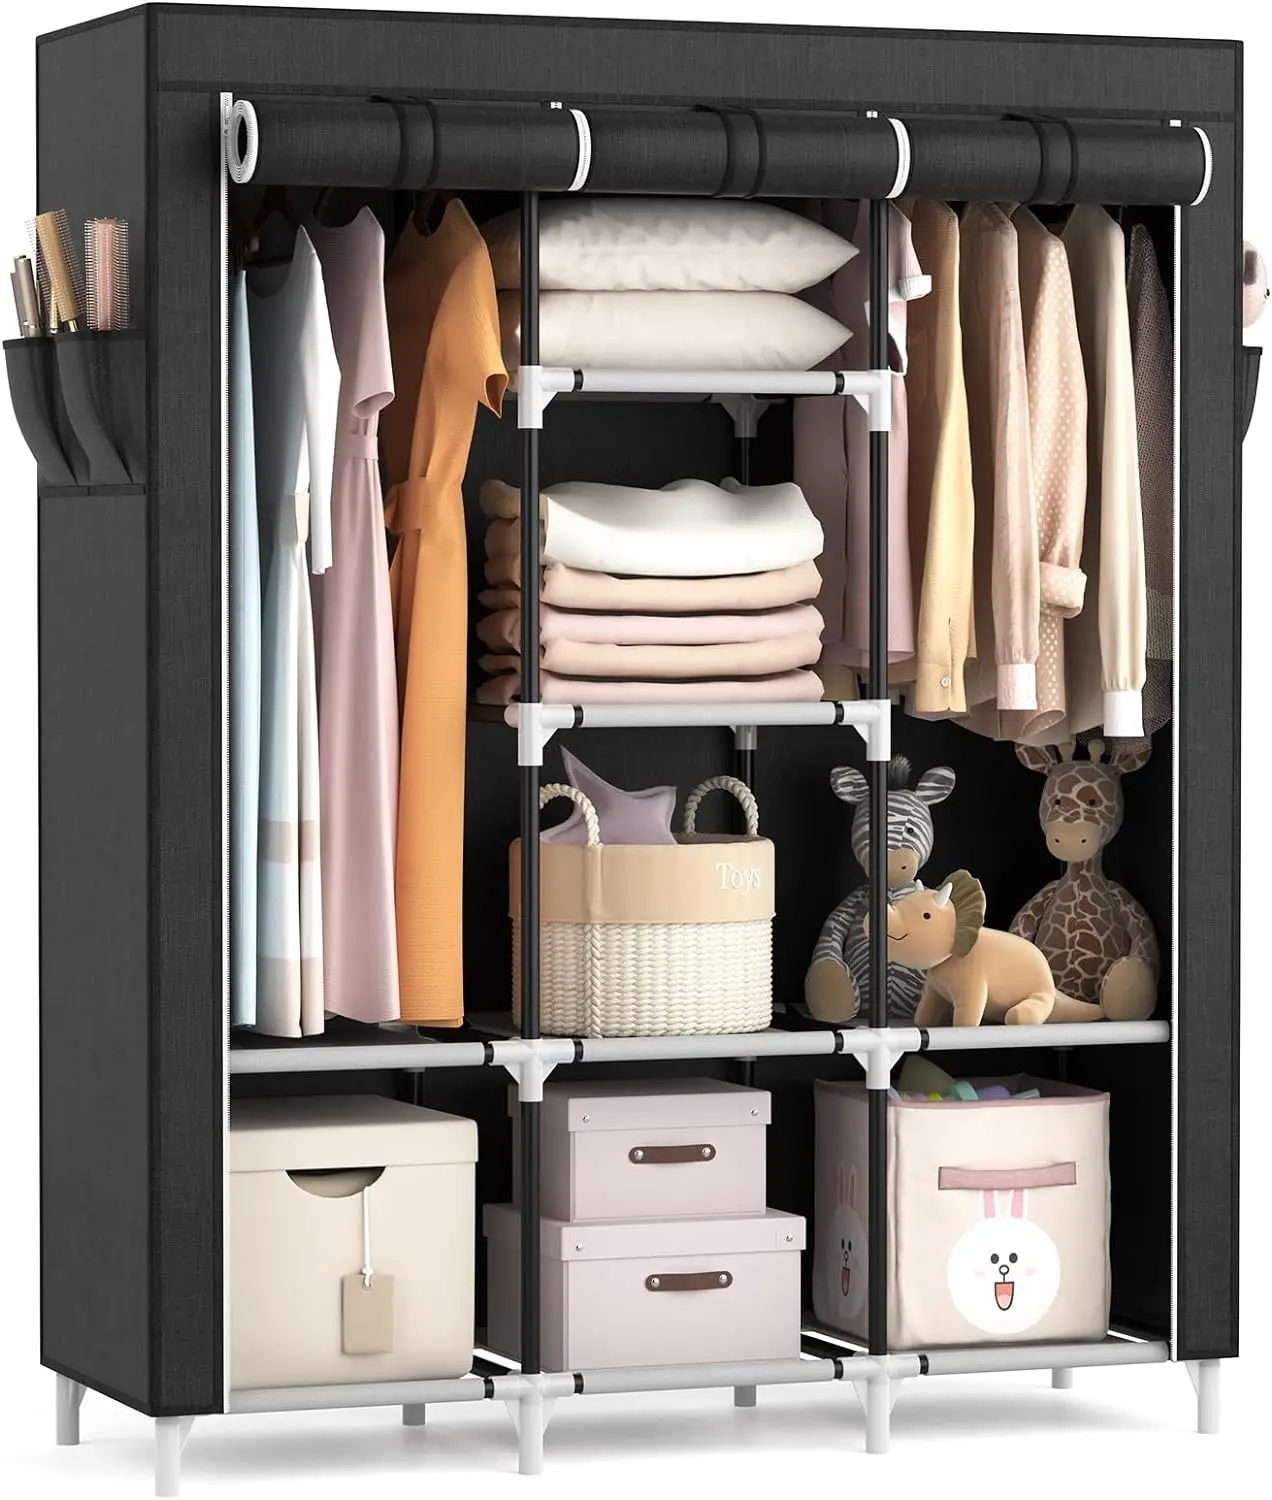 

VTRIN Portable Closet, Large Capacity Portable Wardrobe with 2 Hanging Rods and 8 Storage Shelves, Sturdy Free Standing Closet